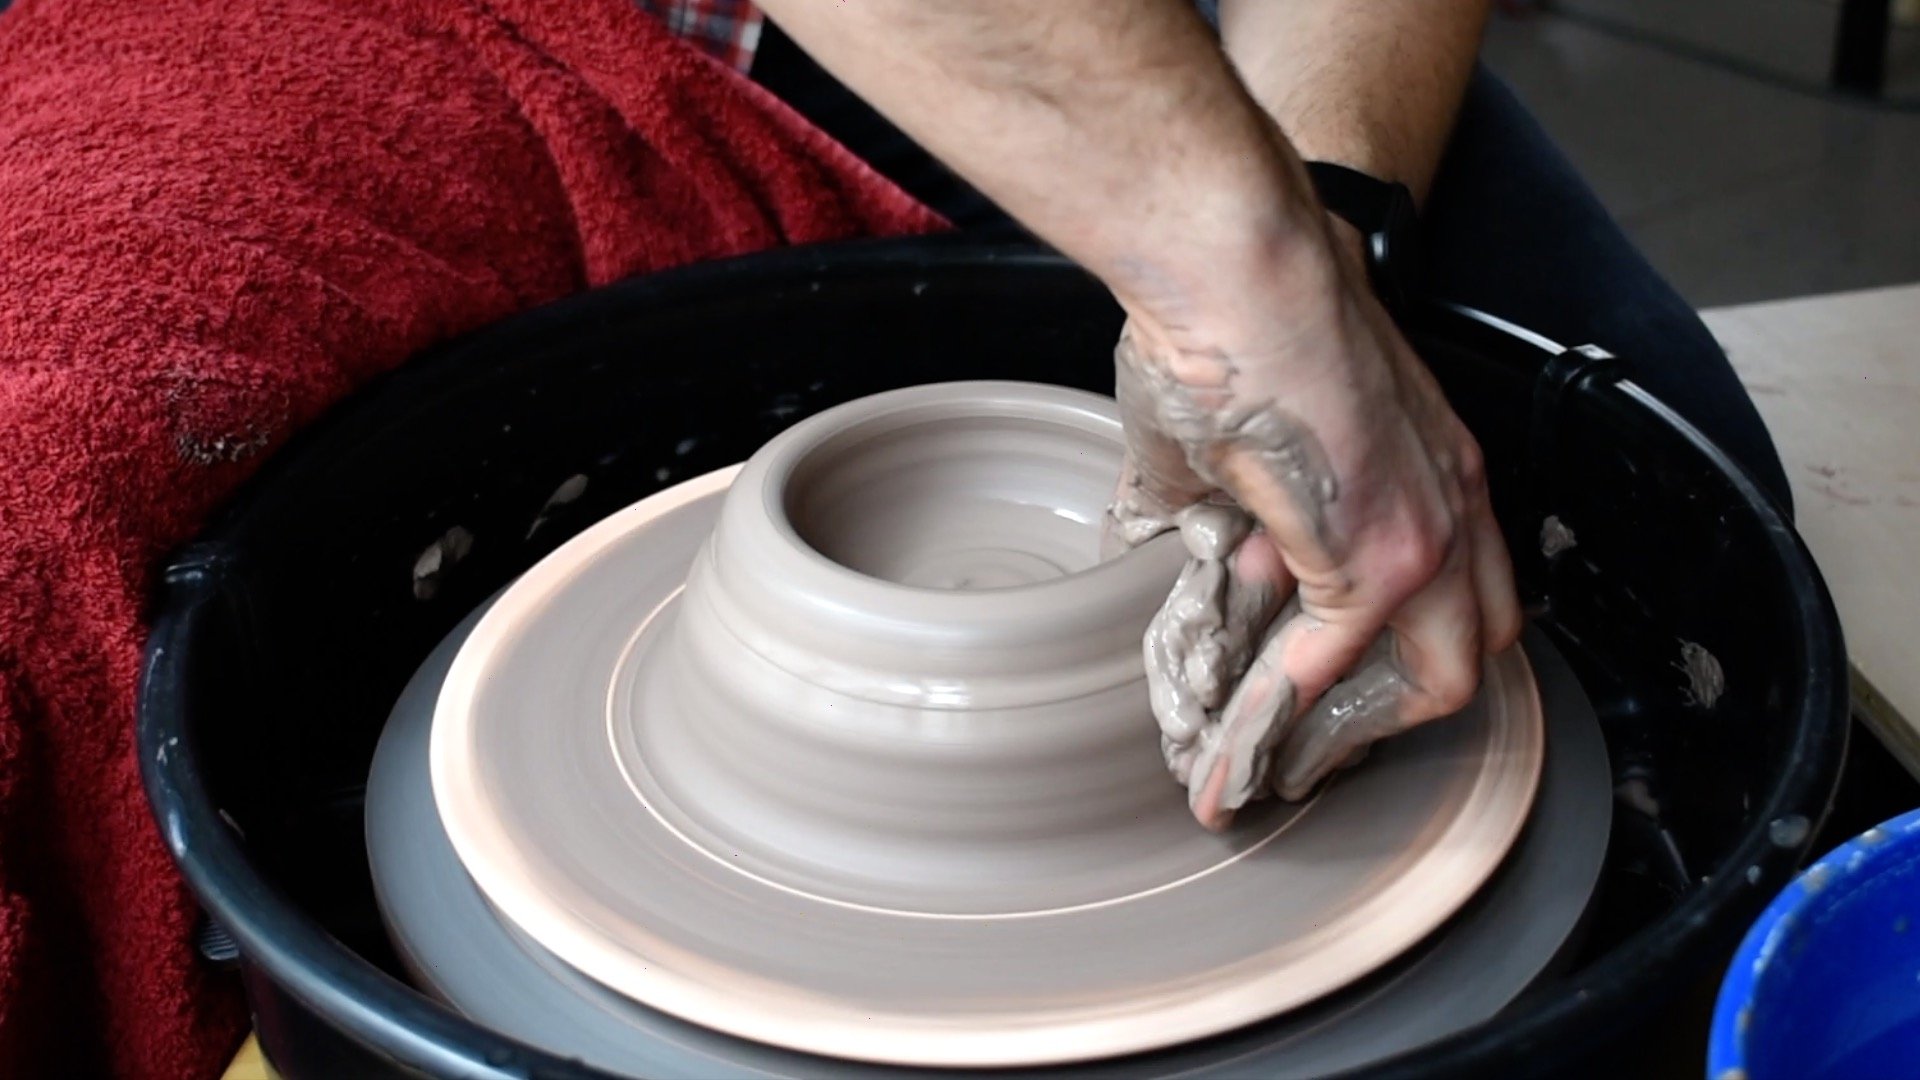 Make a Wide Salad Bowl Pottery Tutorial — The Studio Manager